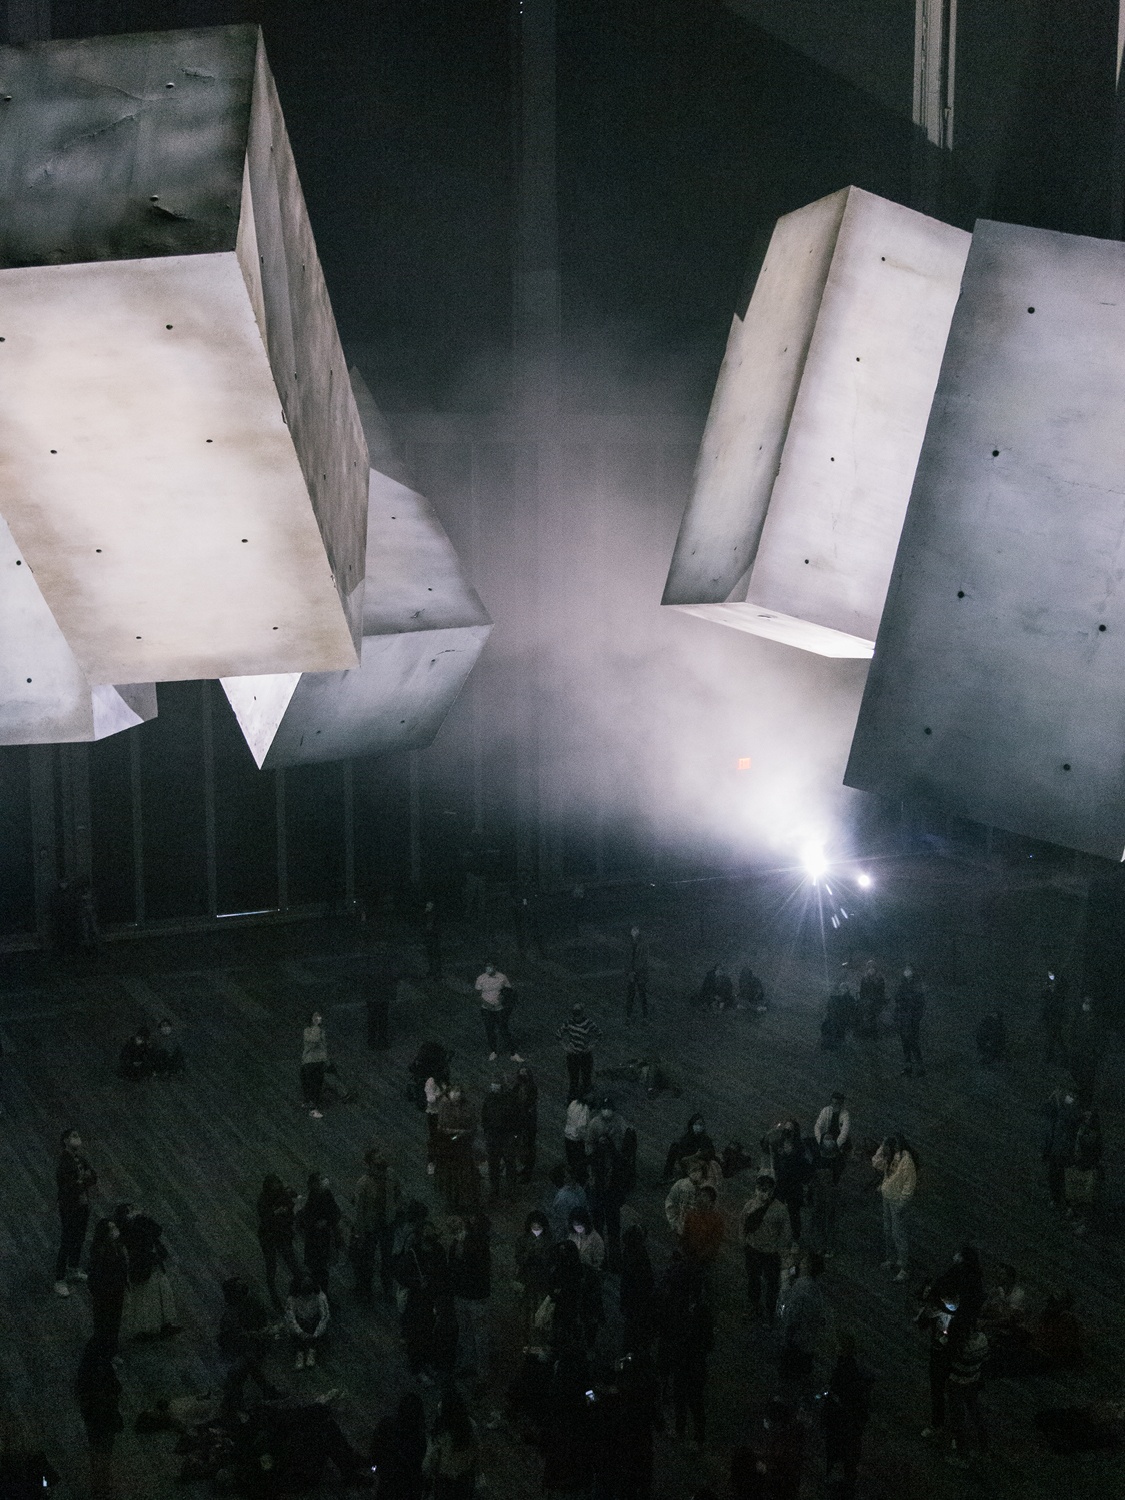 Five rectangular blocks that seem to be made of concrete float in the air above a crowd gathered beneath them